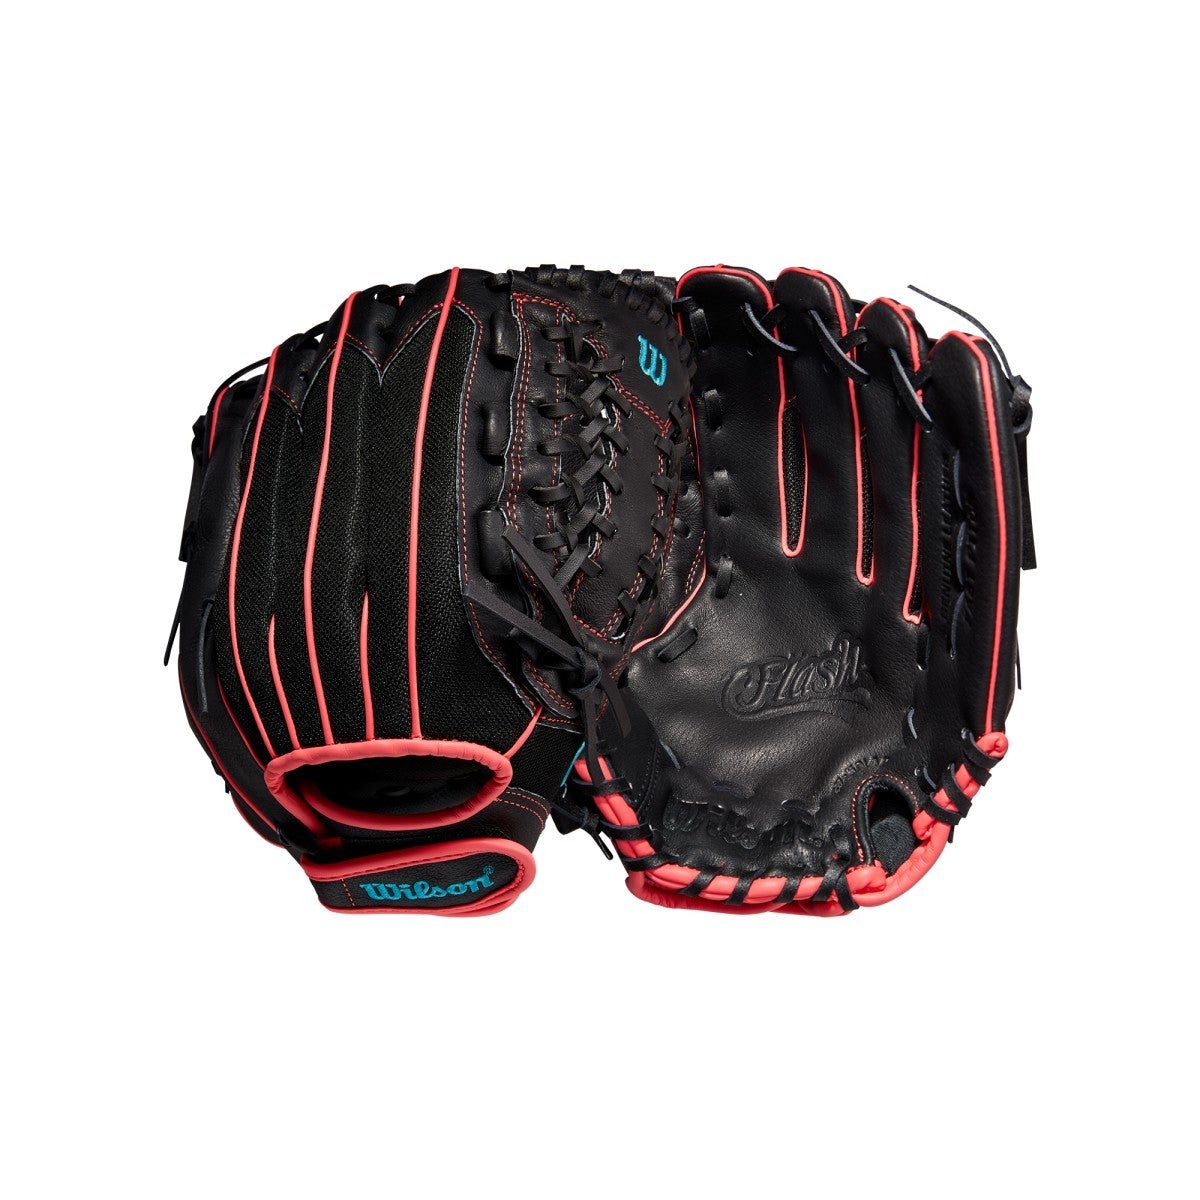 Wilson Baseball / Softball - Flash the leather with Rose Gold accents on  the José Ramírez A2000 JR11 GM, the 12” infield glove with Grey pro Stock  leather and Navy SuperSnakeSkin. Get